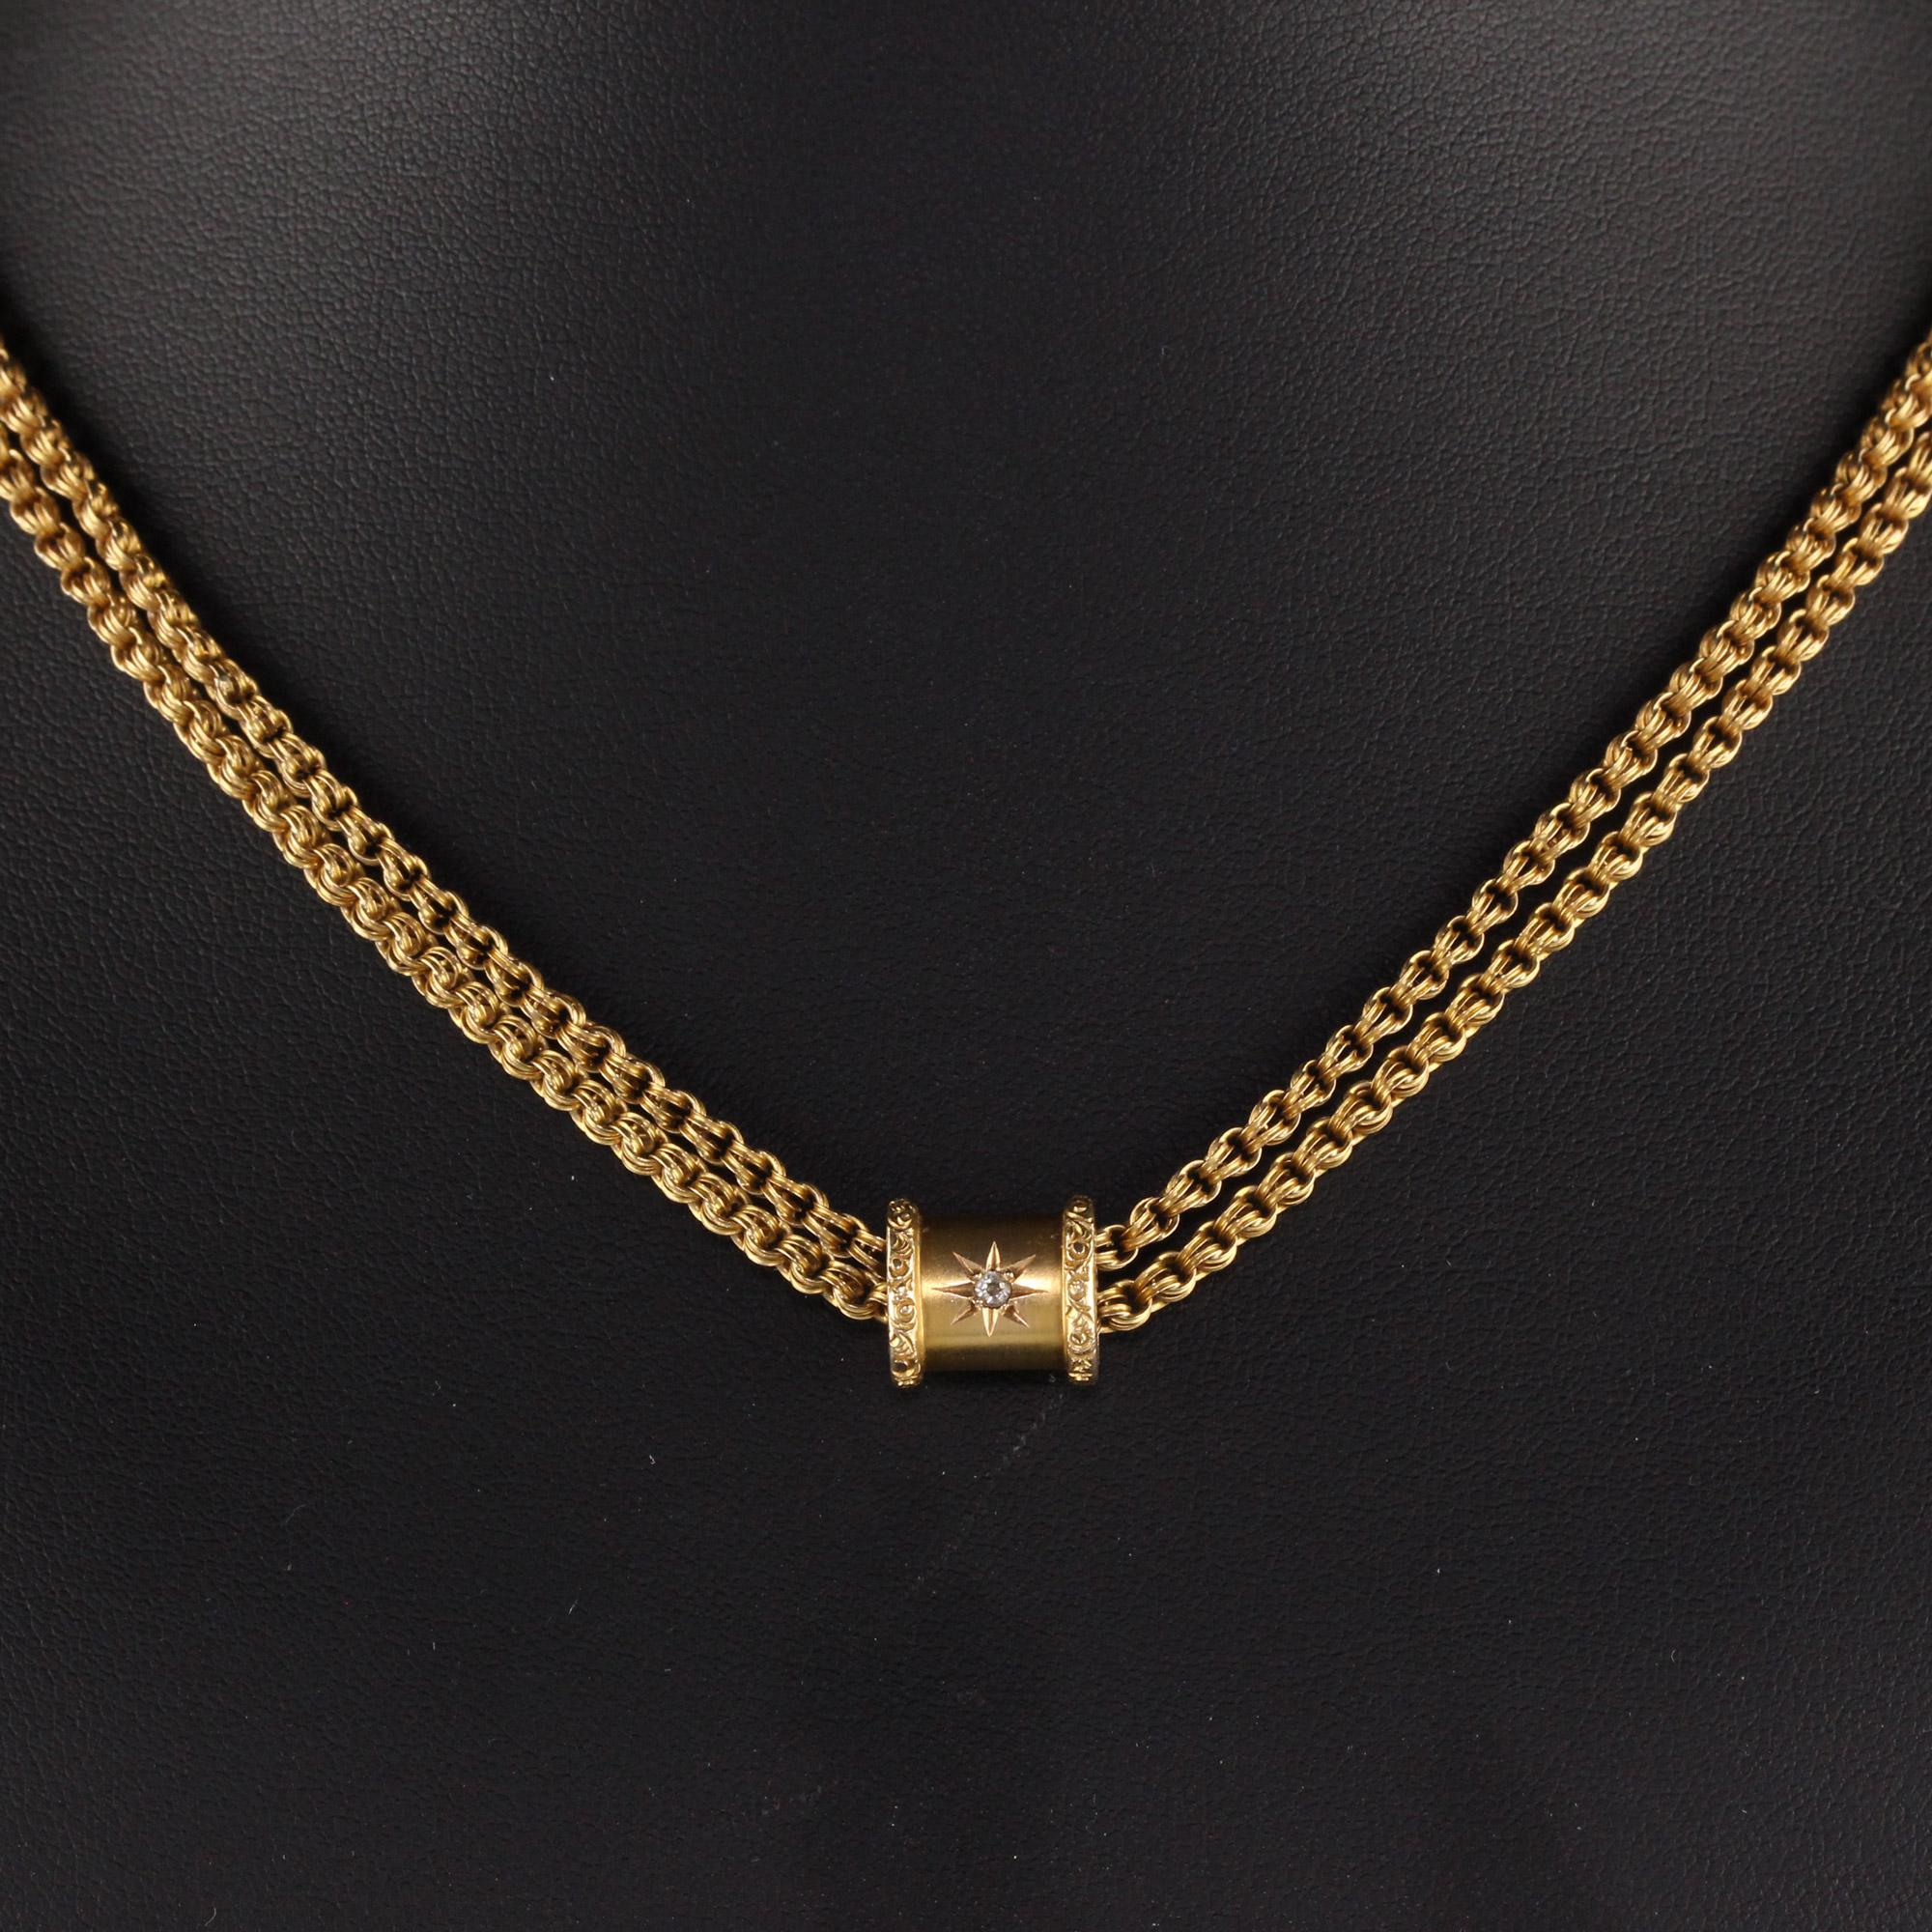 Antique Victorian 14K Yellow Gold Old Euro Diamond Lariat Necklace - 50 inches 1